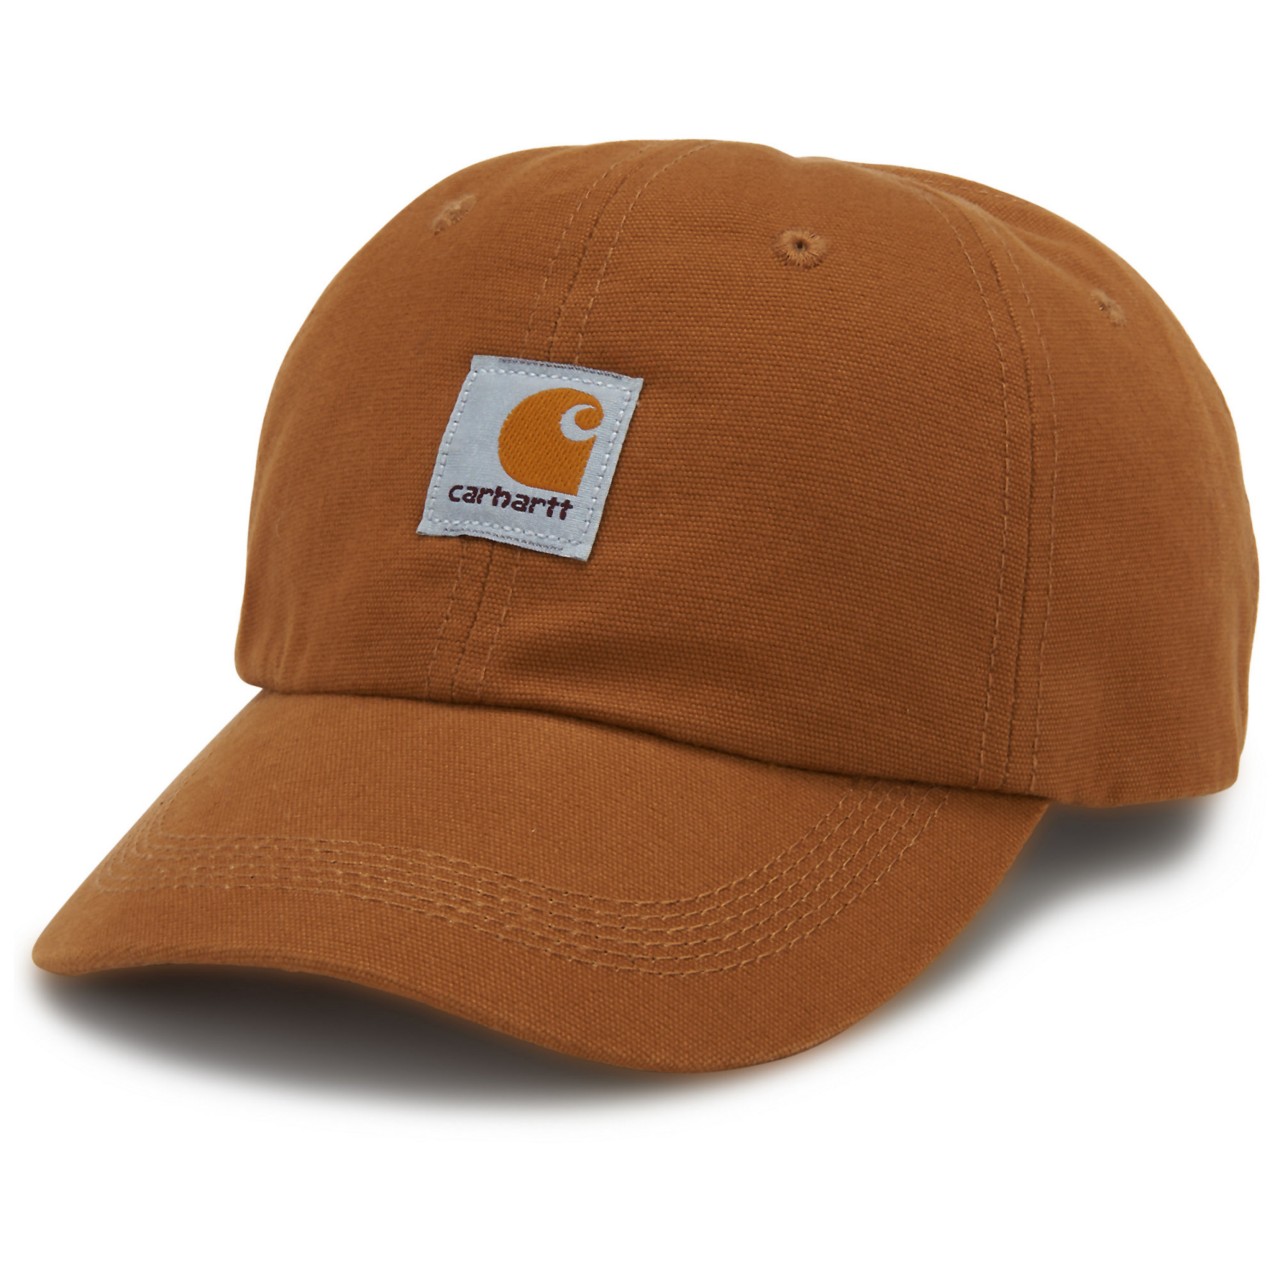 Image of hat links to all kids hats catalog.